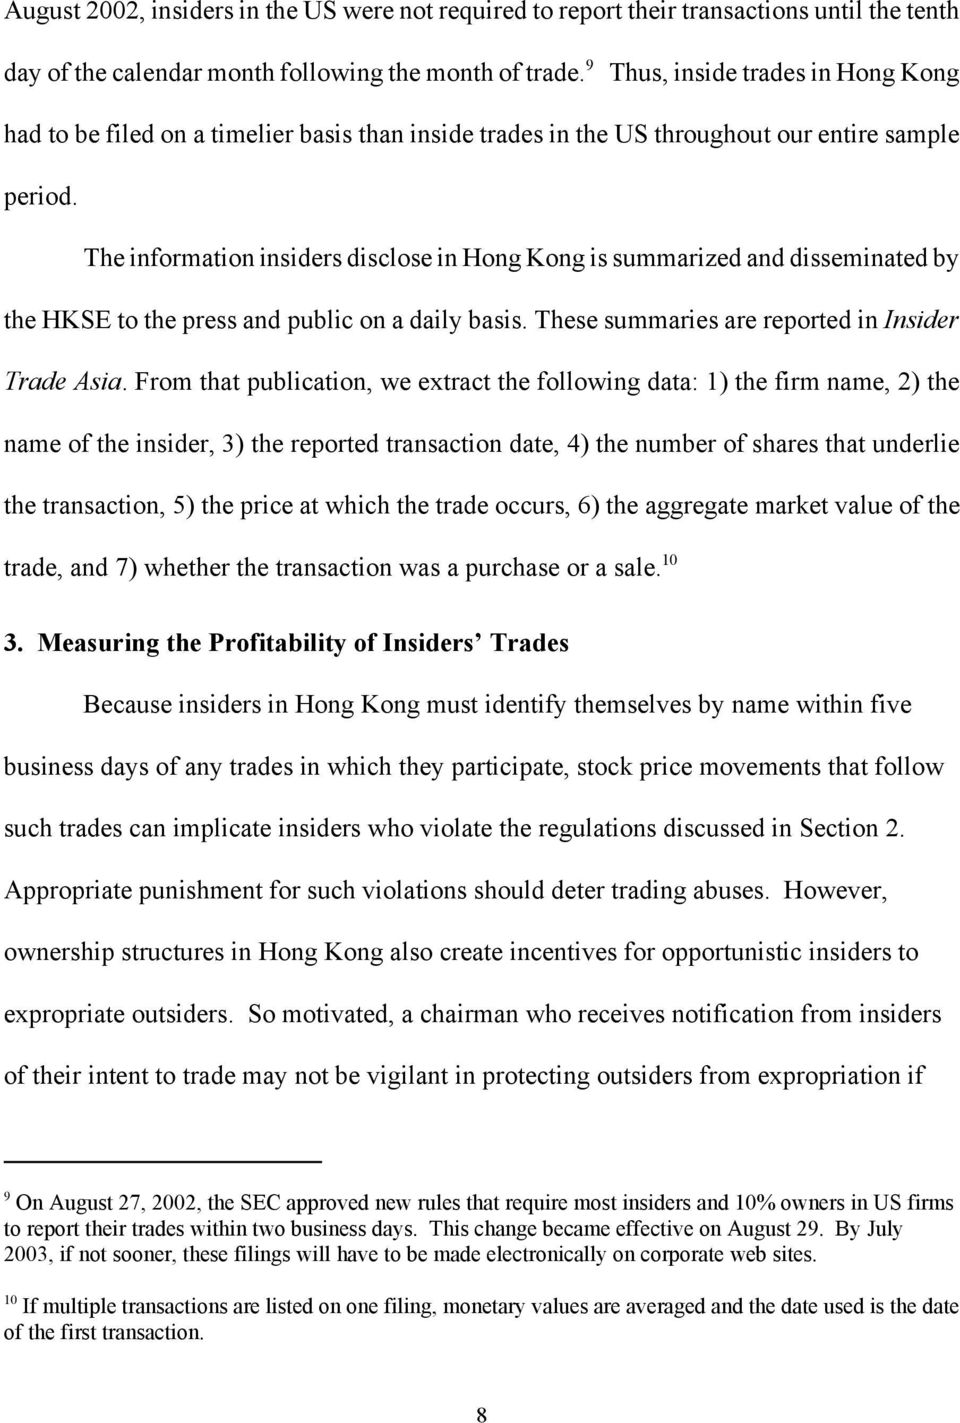 The information insiders disclose in Hong Kong is summarized and disseminated by the HKSE to the press and public on a daily basis. These summaries are reported in Insider Trade Asia.